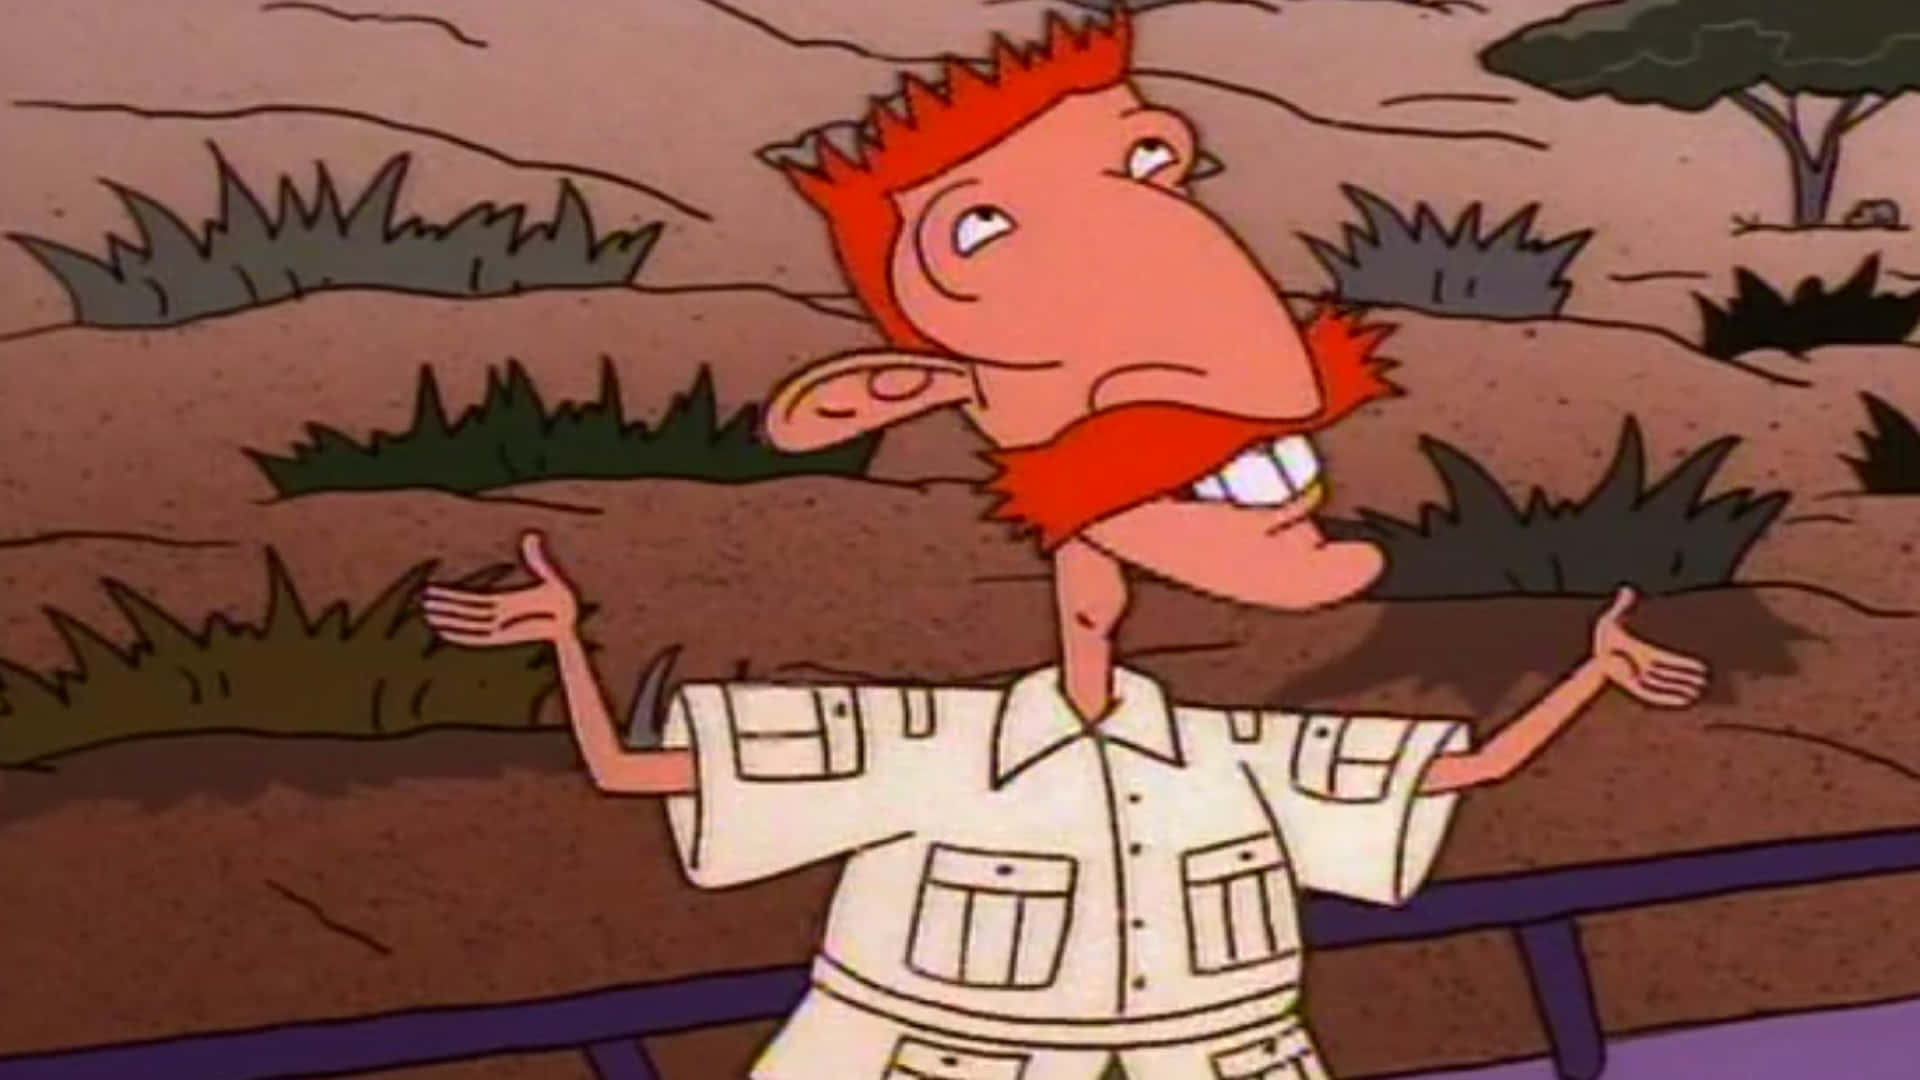 Download Caption Animated Character Nigel Thornberry From The Wild Thornberrys Animated Series